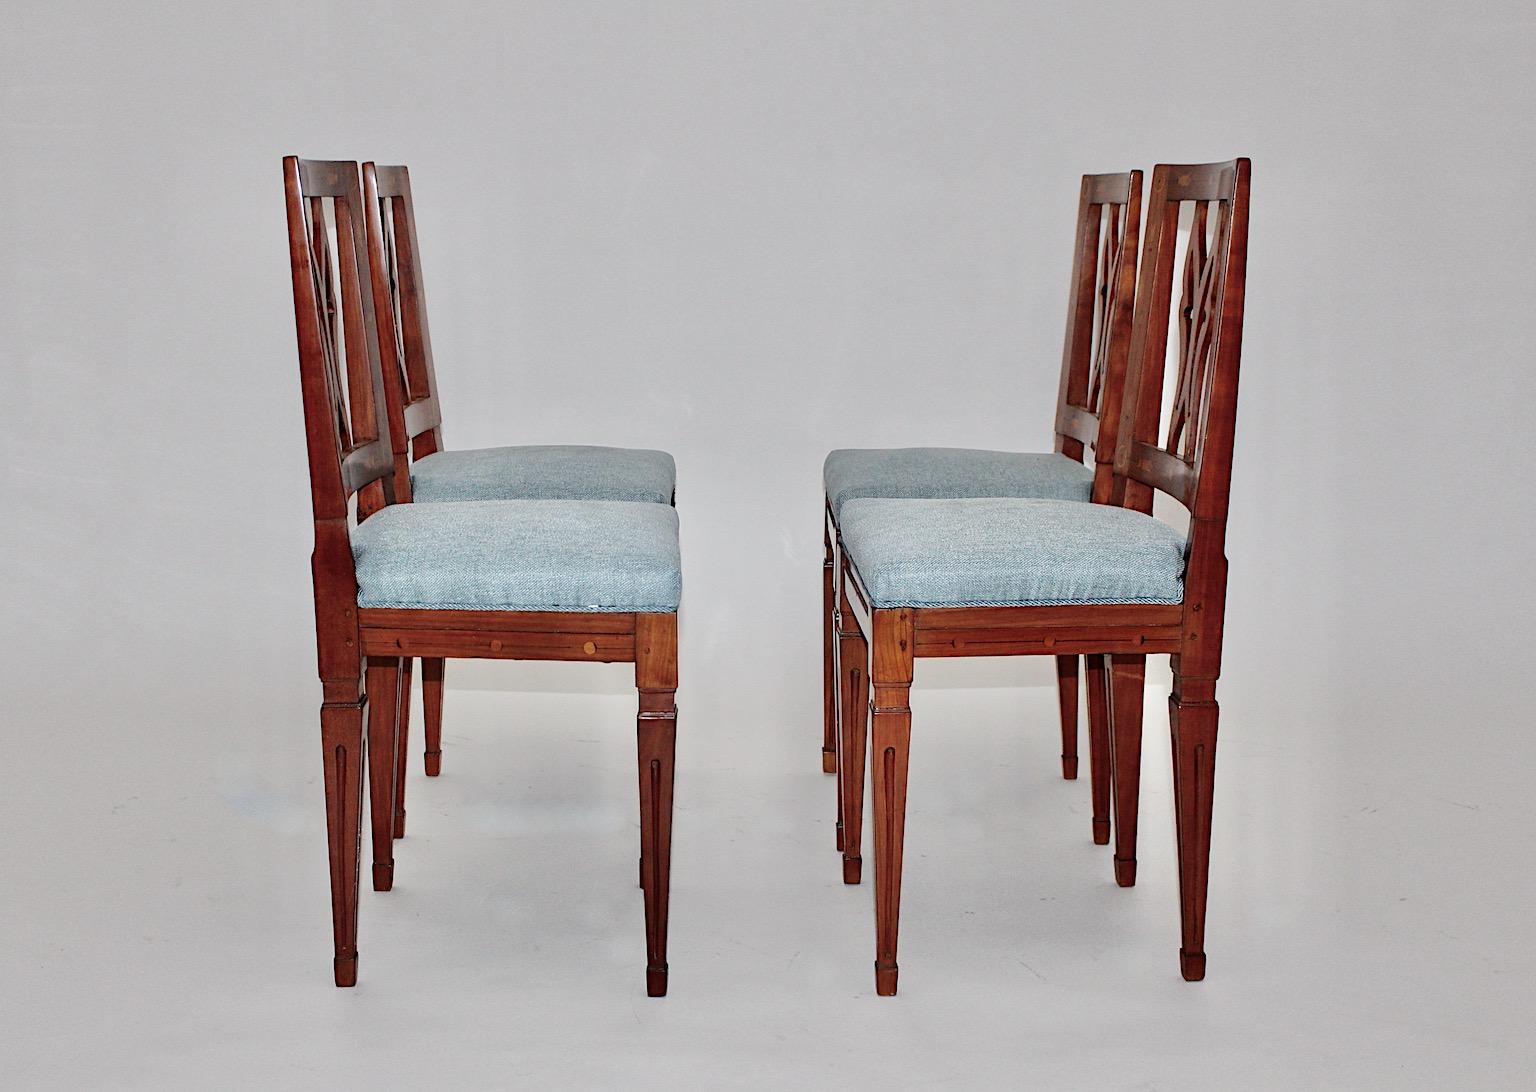 Cherrywood Maple Blue Upholstery Dining Chairs Set of Four circa 1780 Austria 3